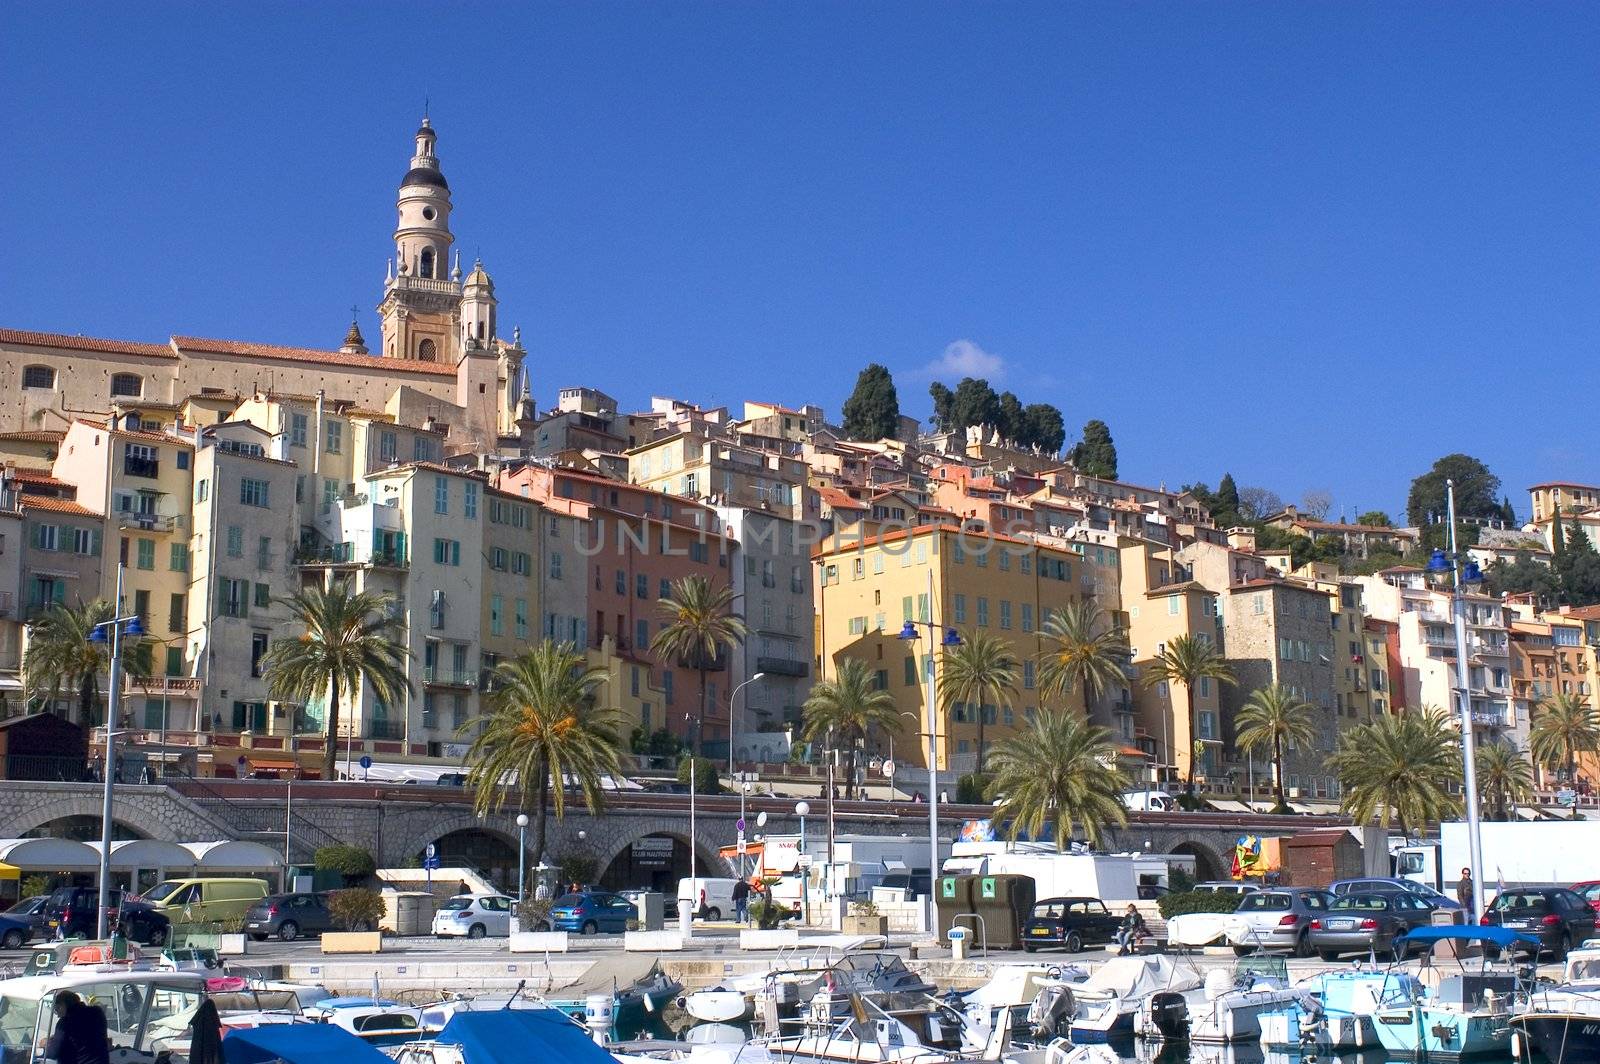 City of Menton by gillespaire